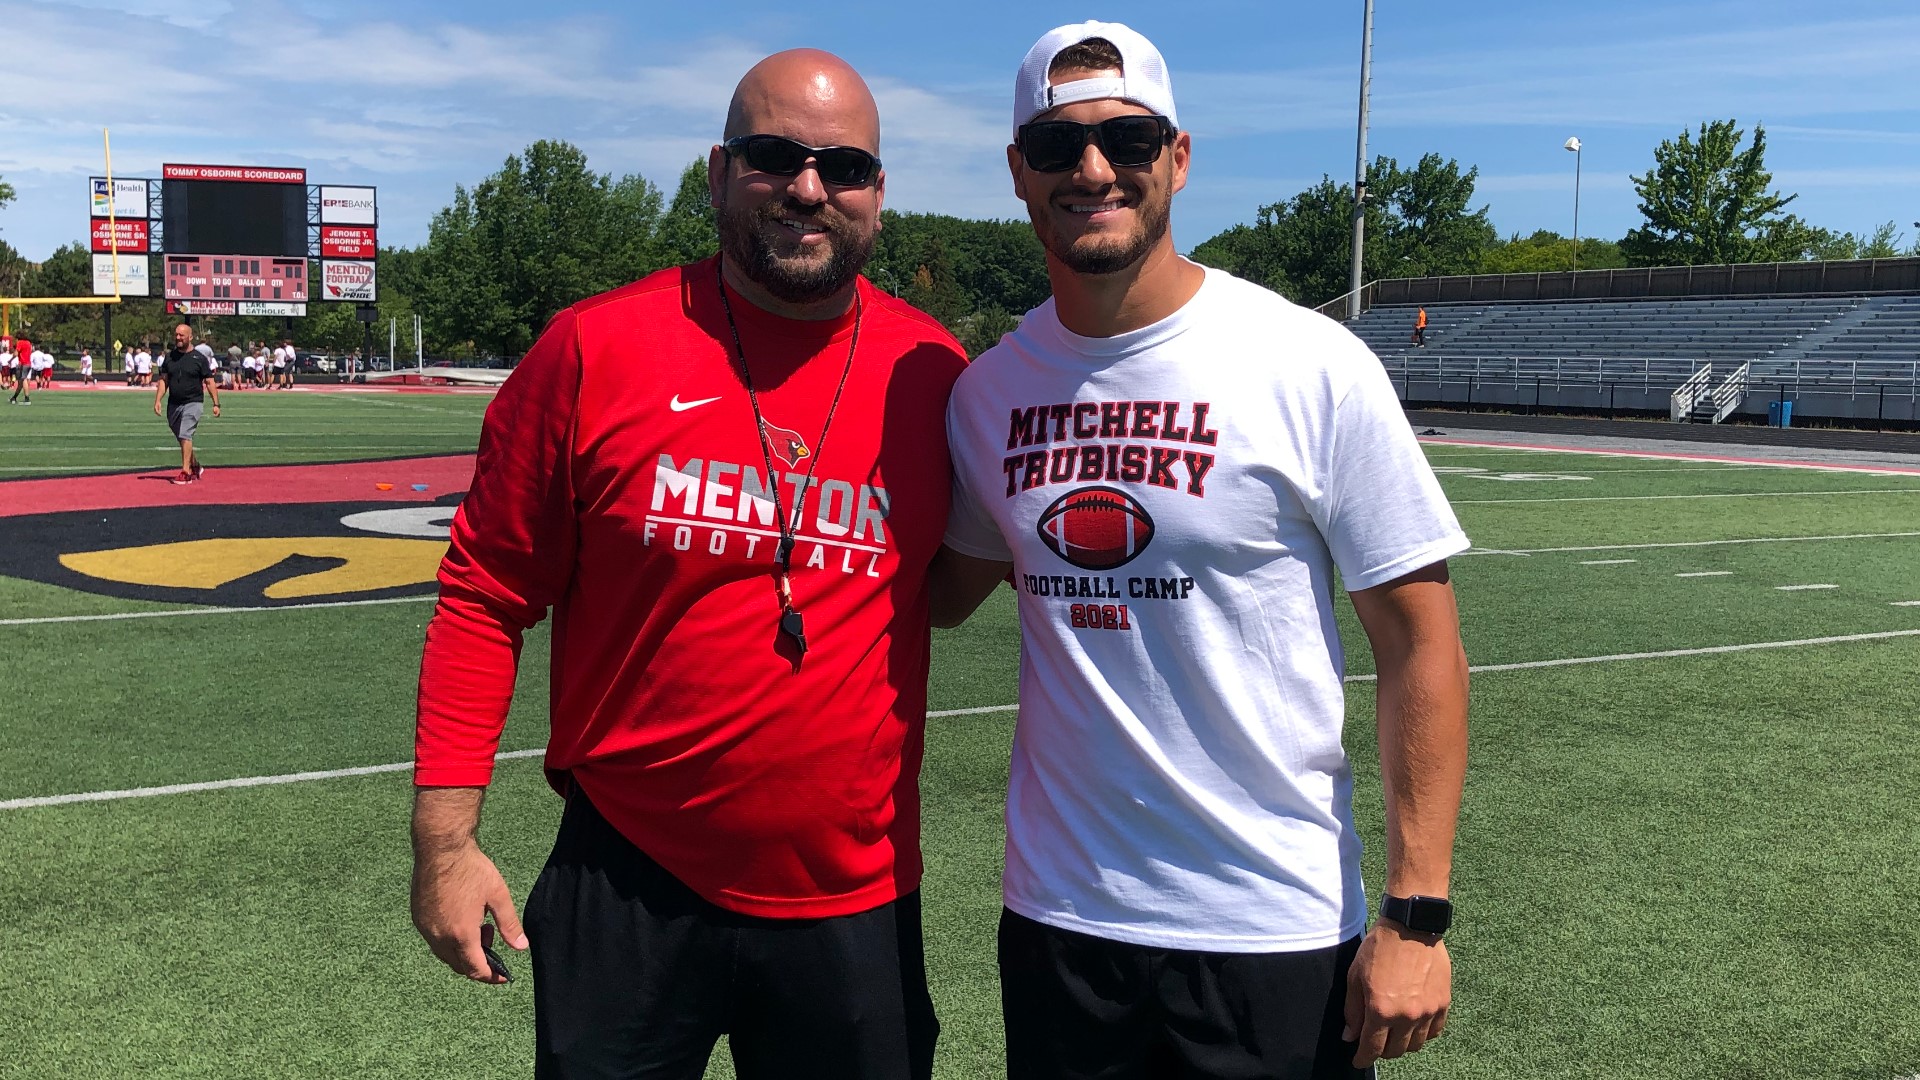 Buffalo Bills quarterback Mitchell Trubisky held a youth football camp at his alma mater, Mentor High School, this week.